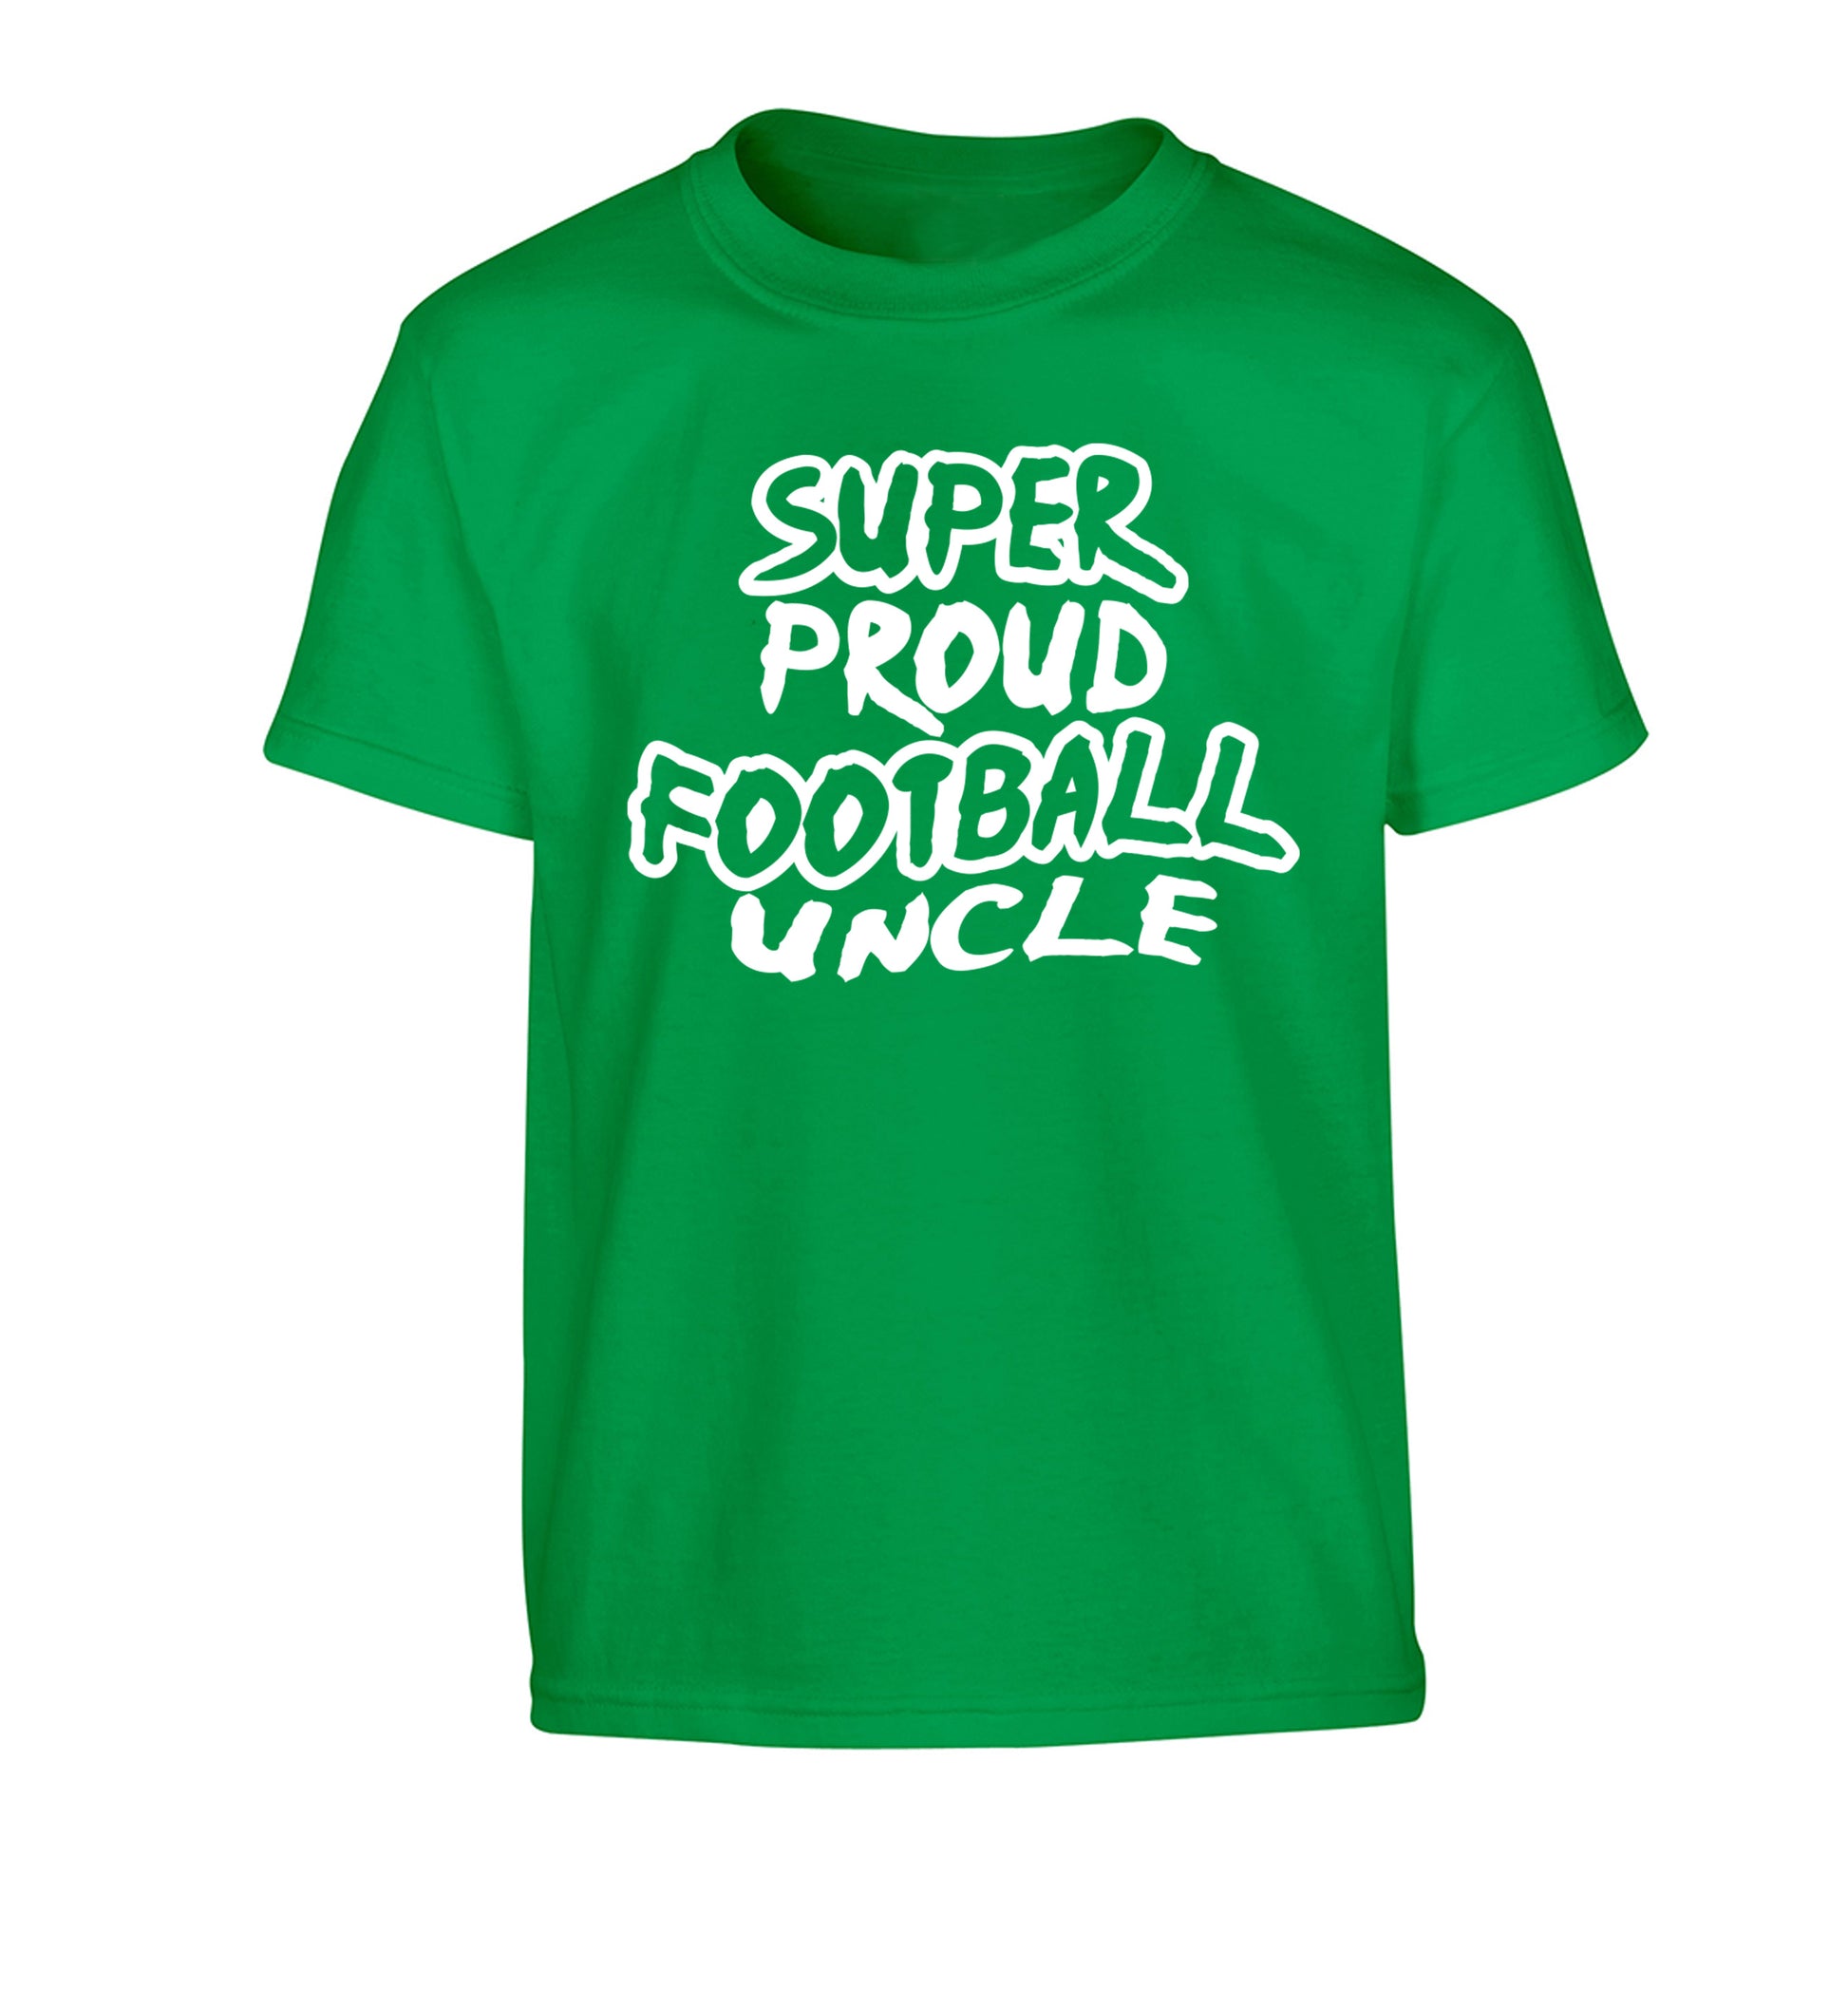 Super proud football uncle Children's green Tshirt 12-14 Years